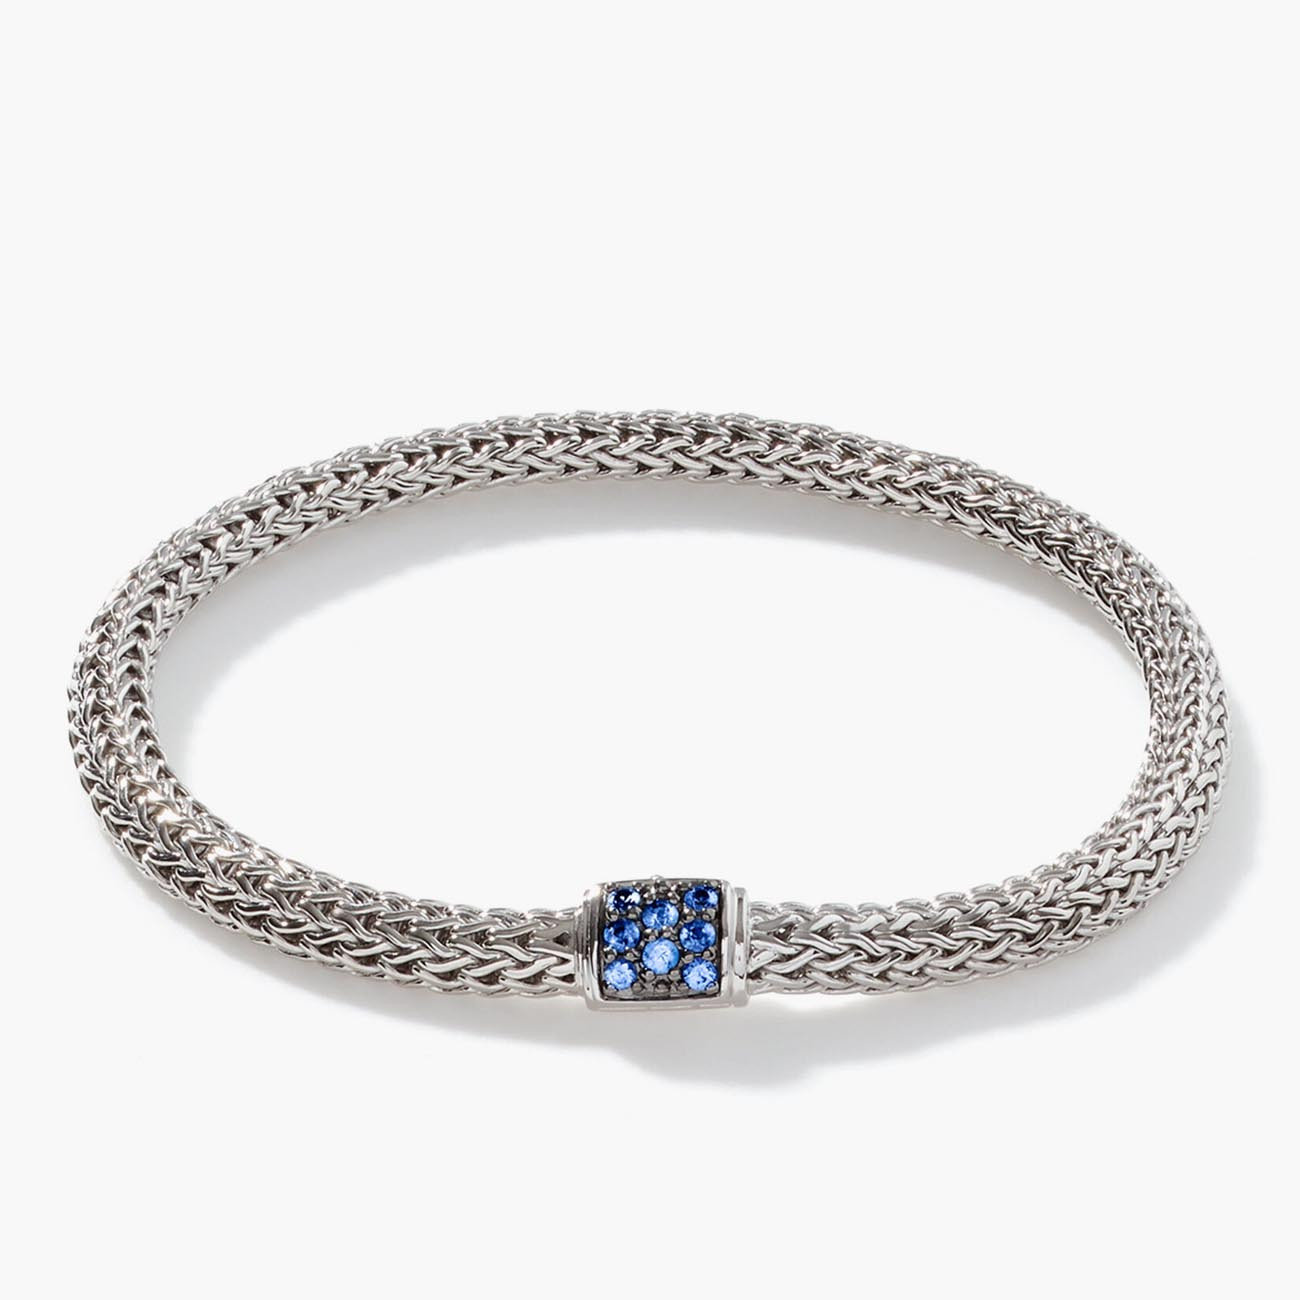 John Hardy Classic Chain 5mm Silver Bracelet with Blue Sapphire Clasp